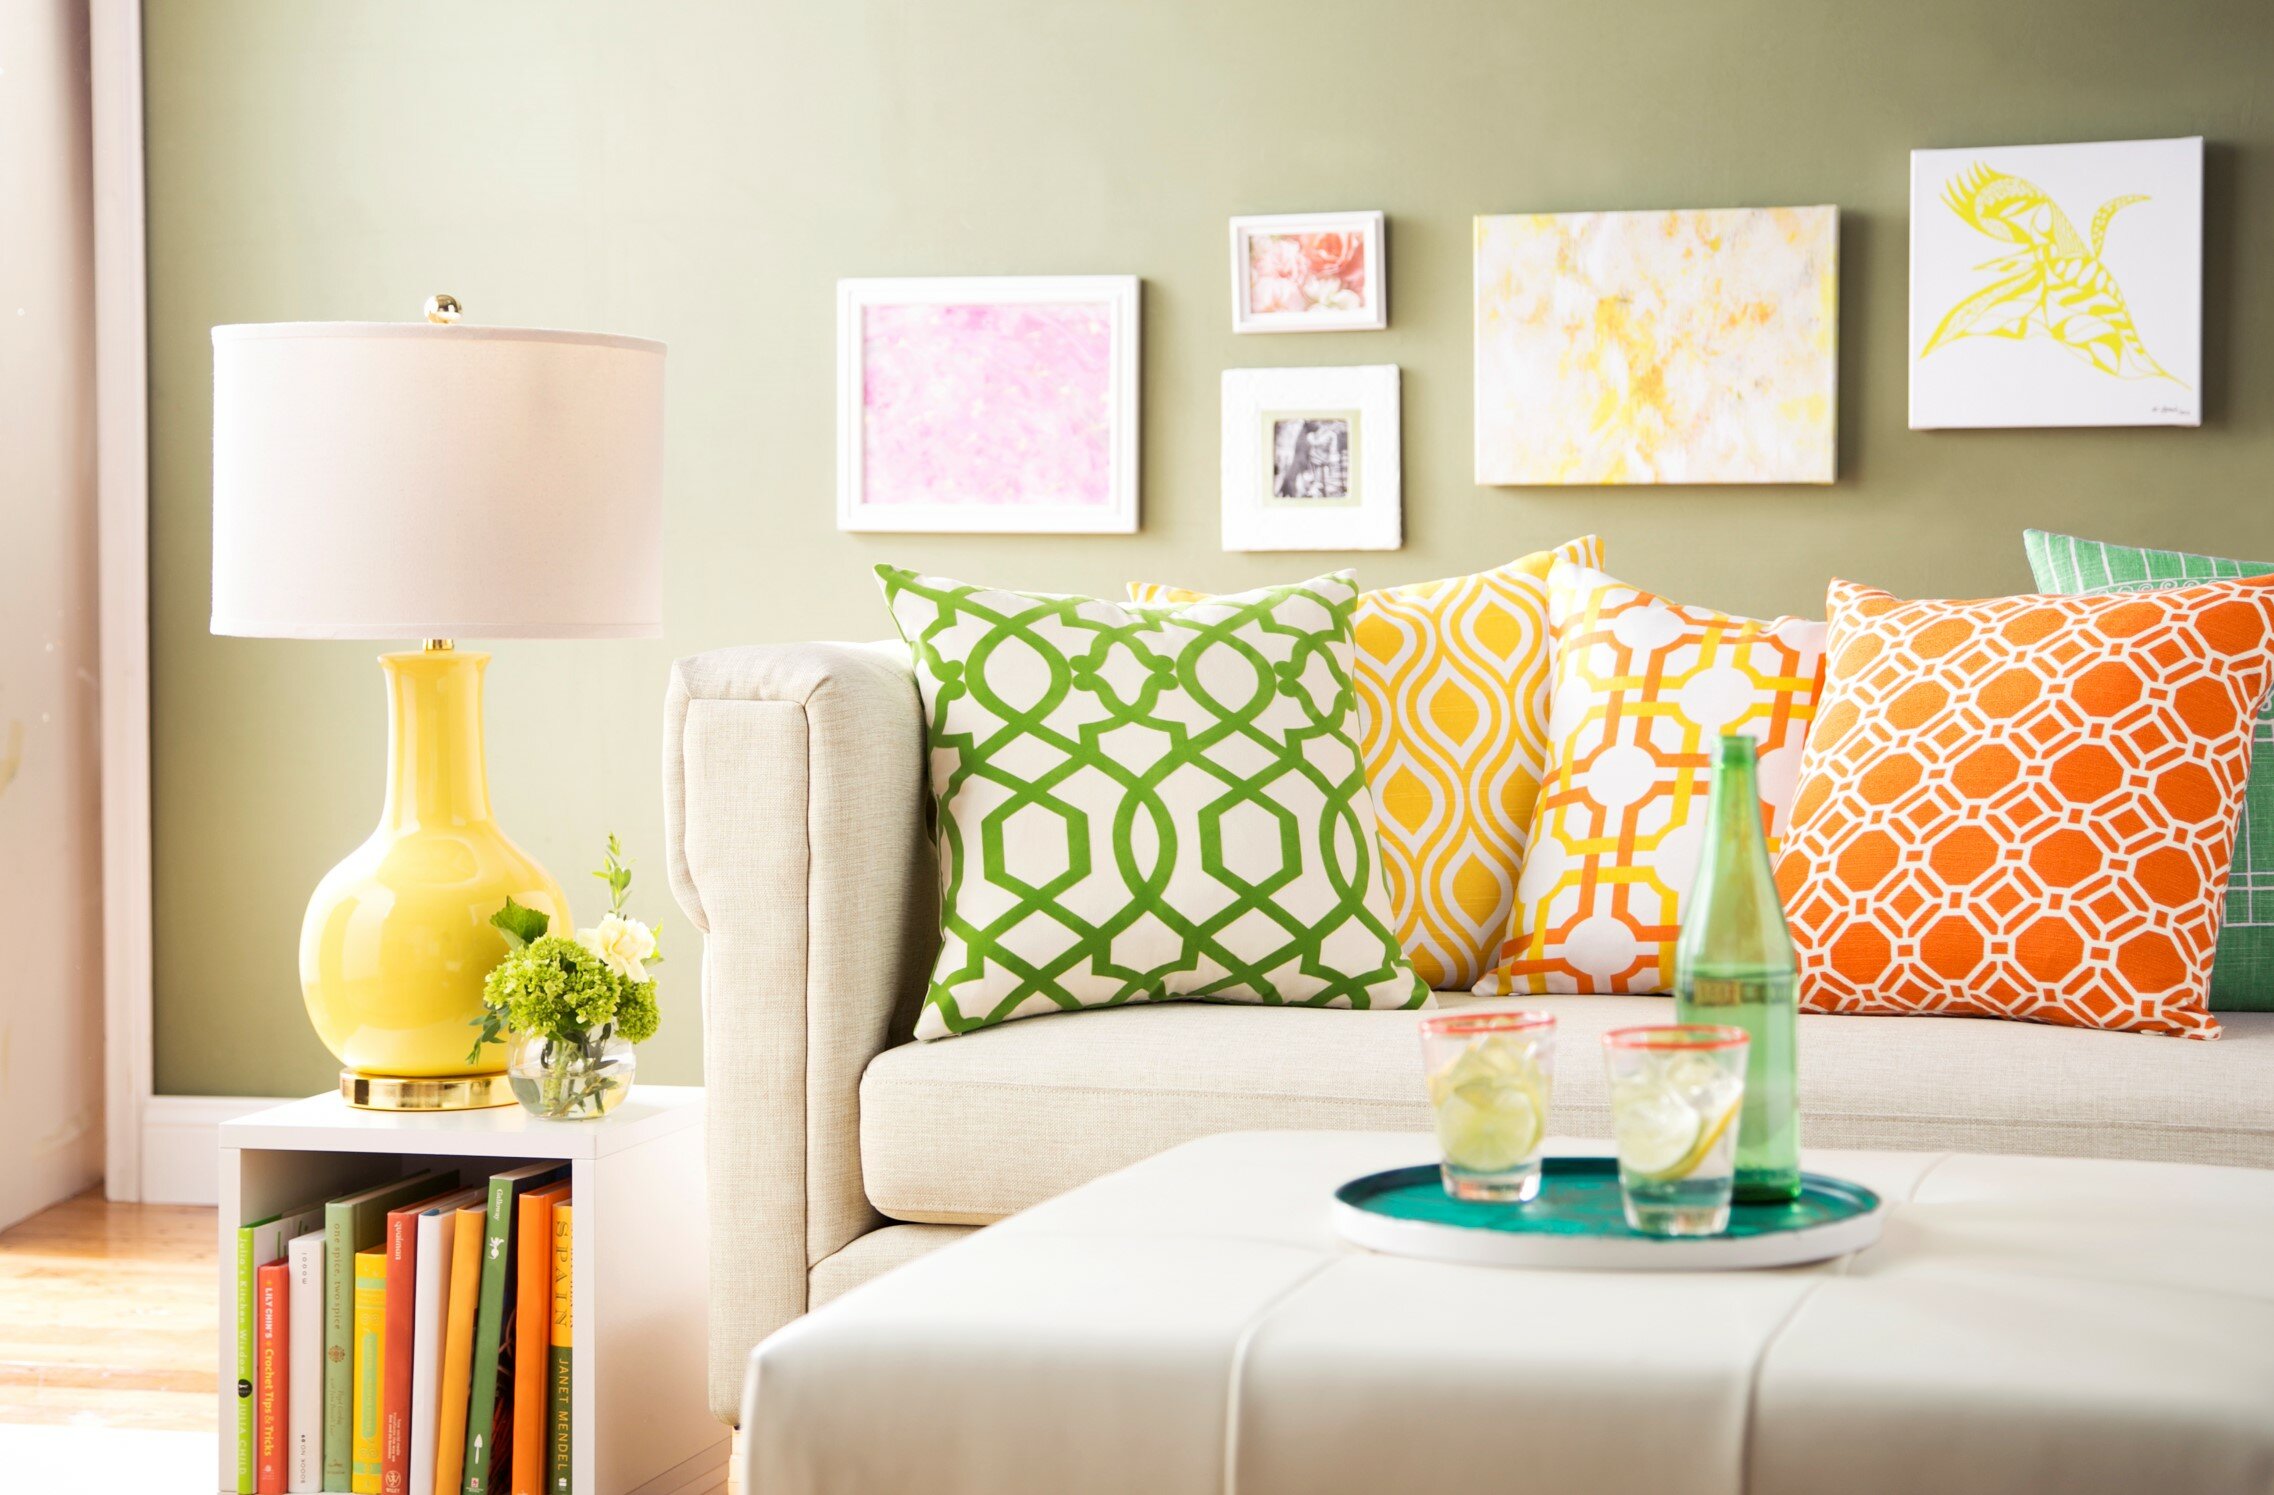 Guide To The Types Of Fabric Patterns Wayfair,Checkers Game Setup